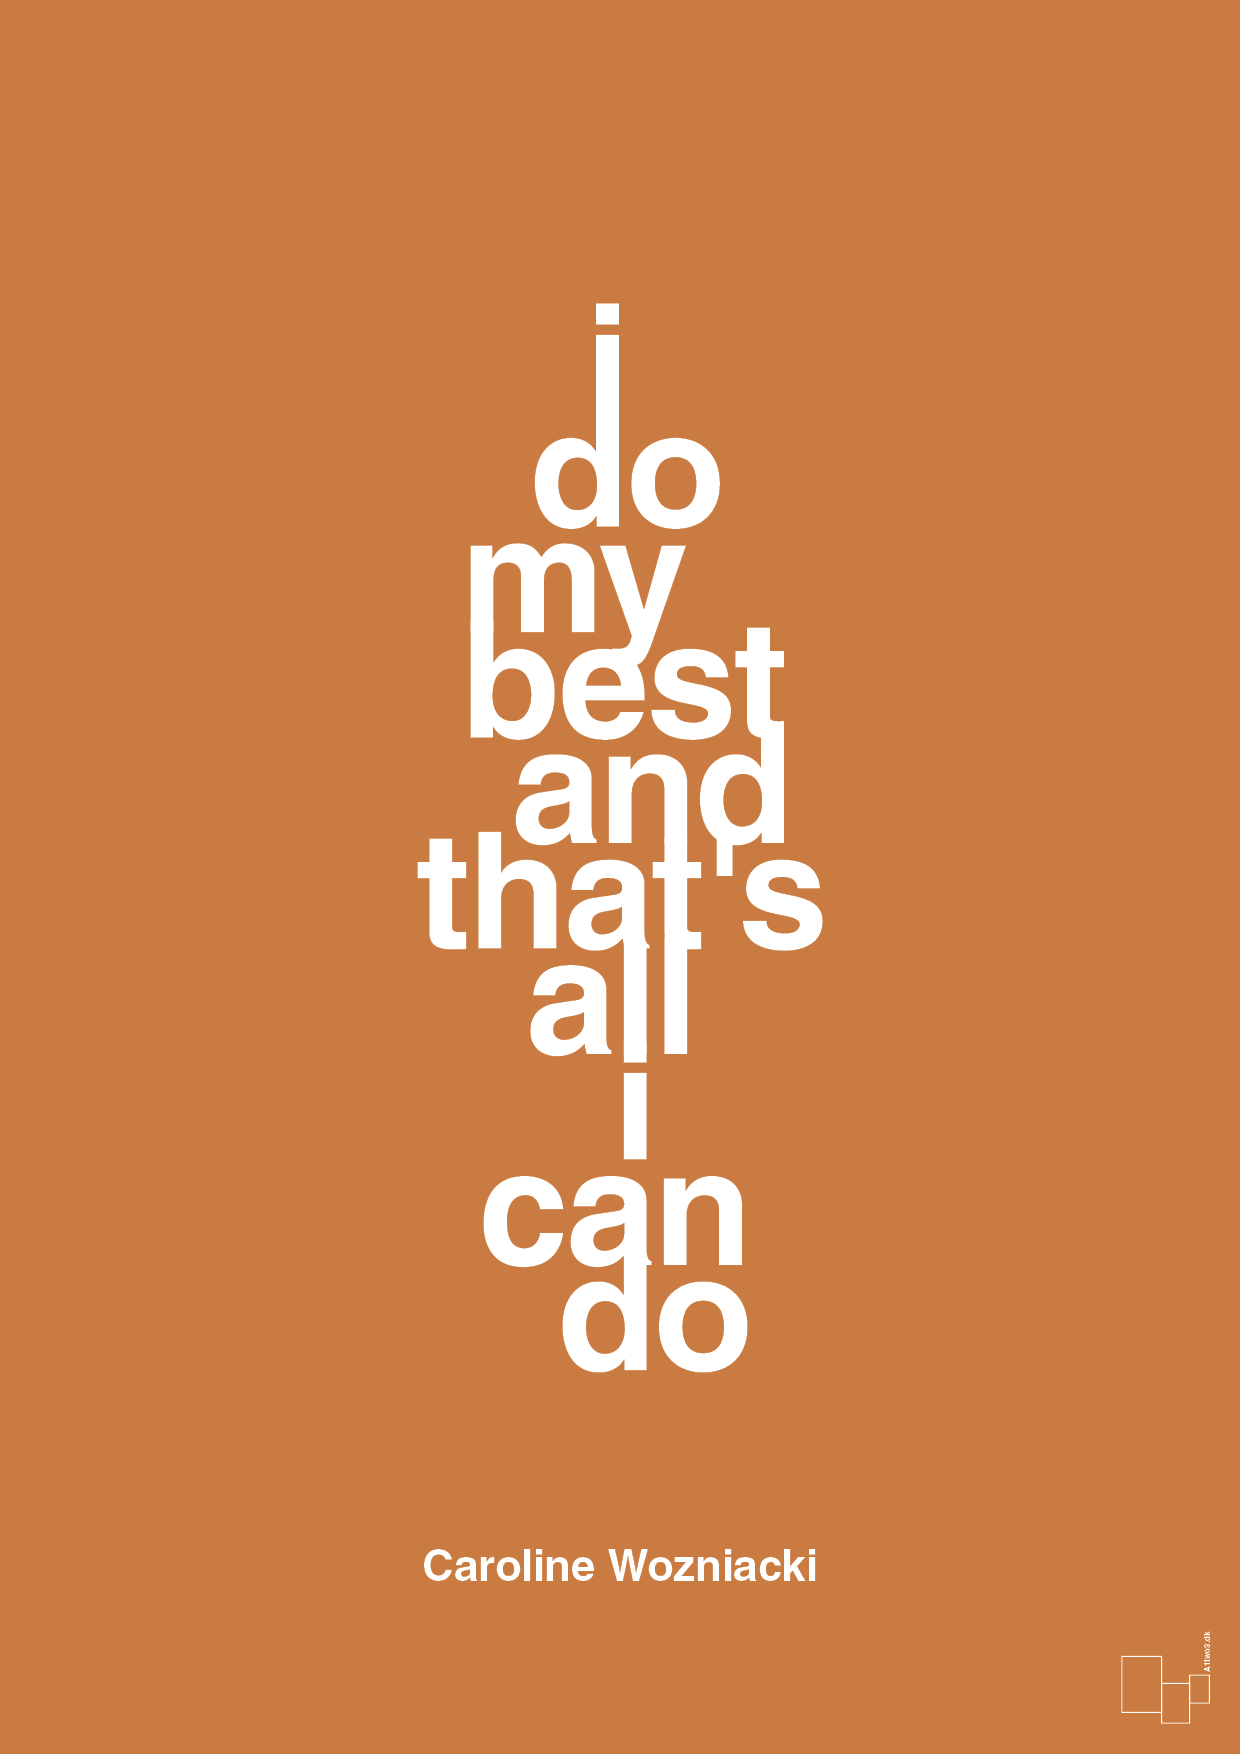 i do my best and that's all i can do - Plakat med Citater i Rumba Orange